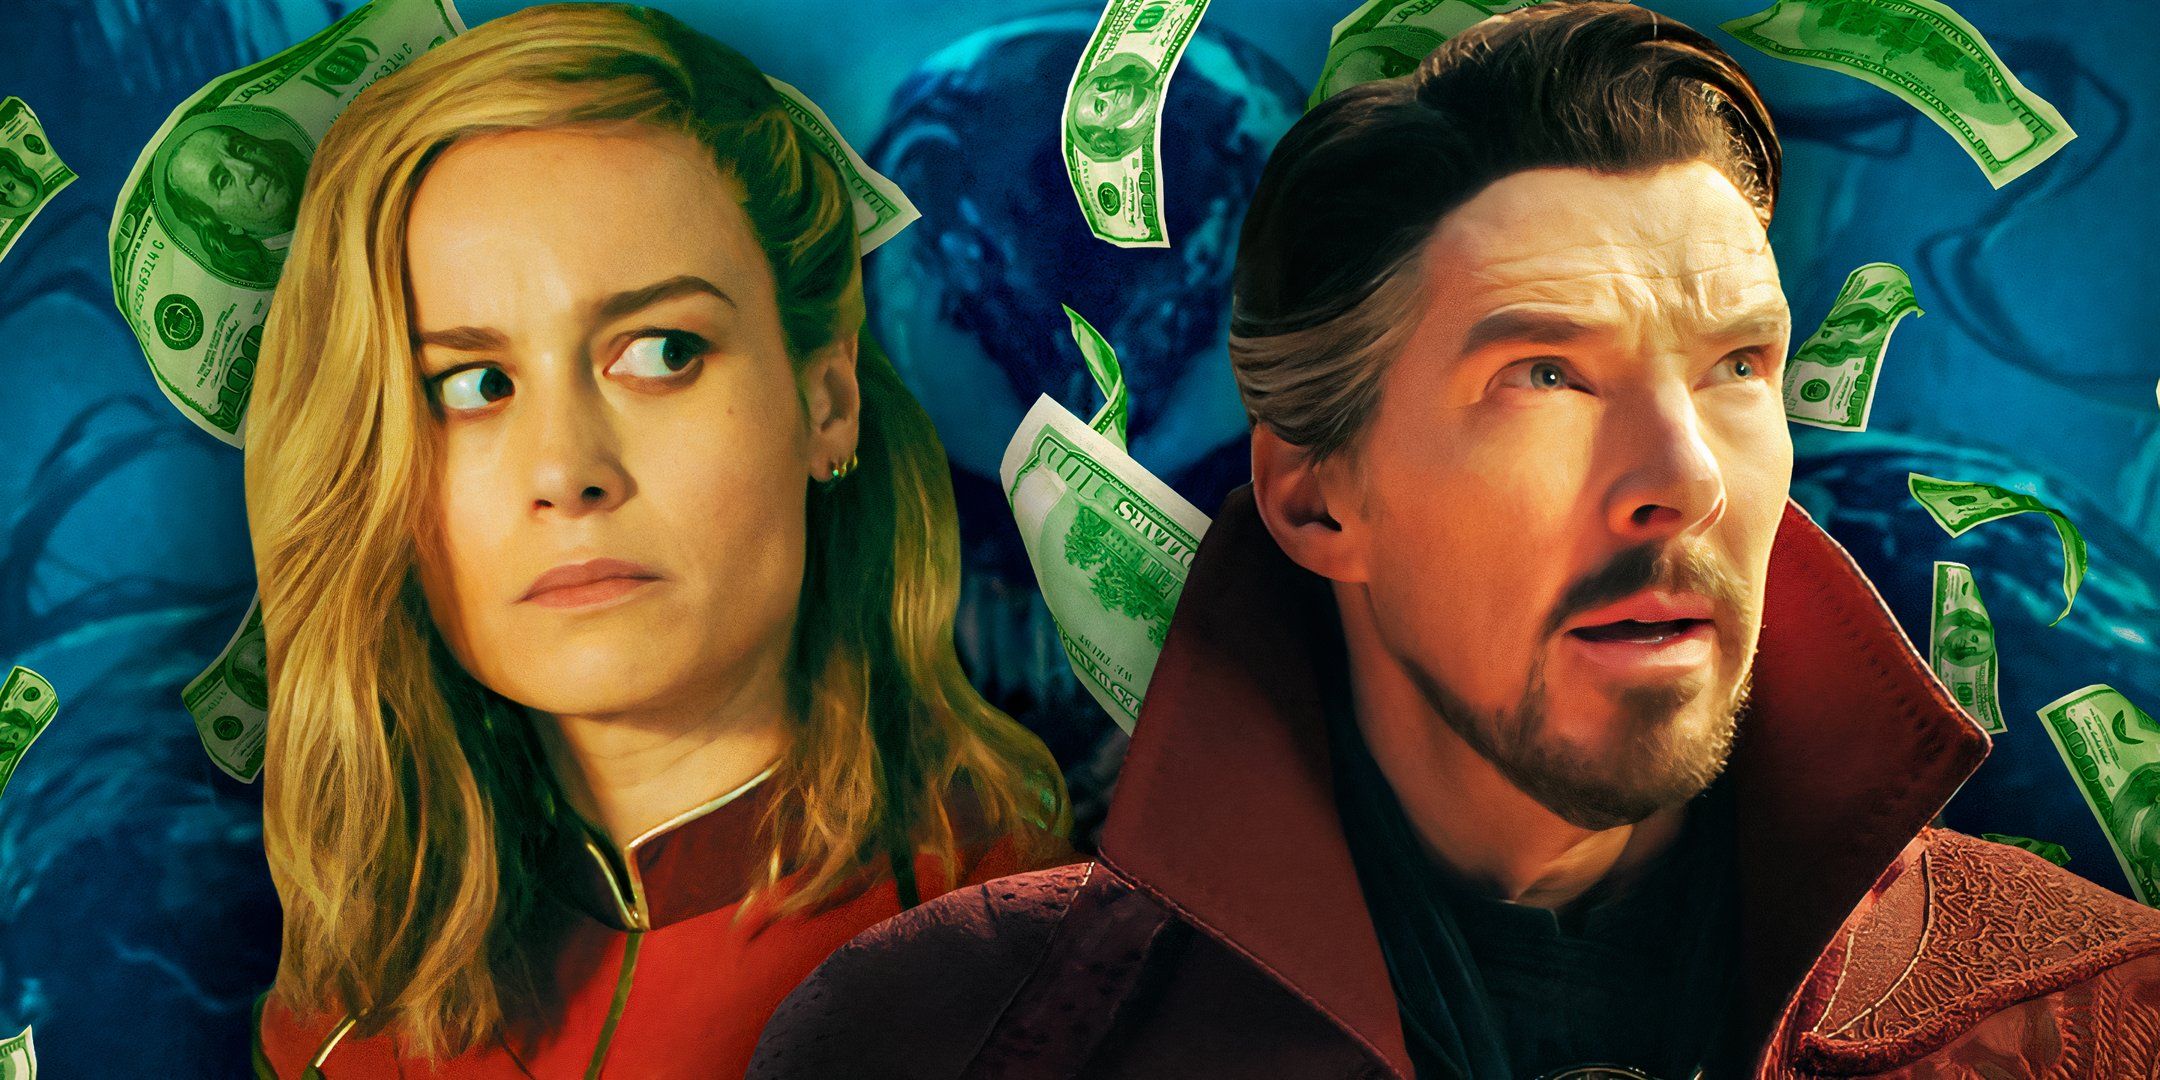 (Brie-Larson-as-Captain-Marvel)-from-Captain-Marvel-and-(Benedict-Cumberbatch-as-Doctor-Stephen-Strange)-from-Doctor-Strange-in-the-Multiverse-of-Madness